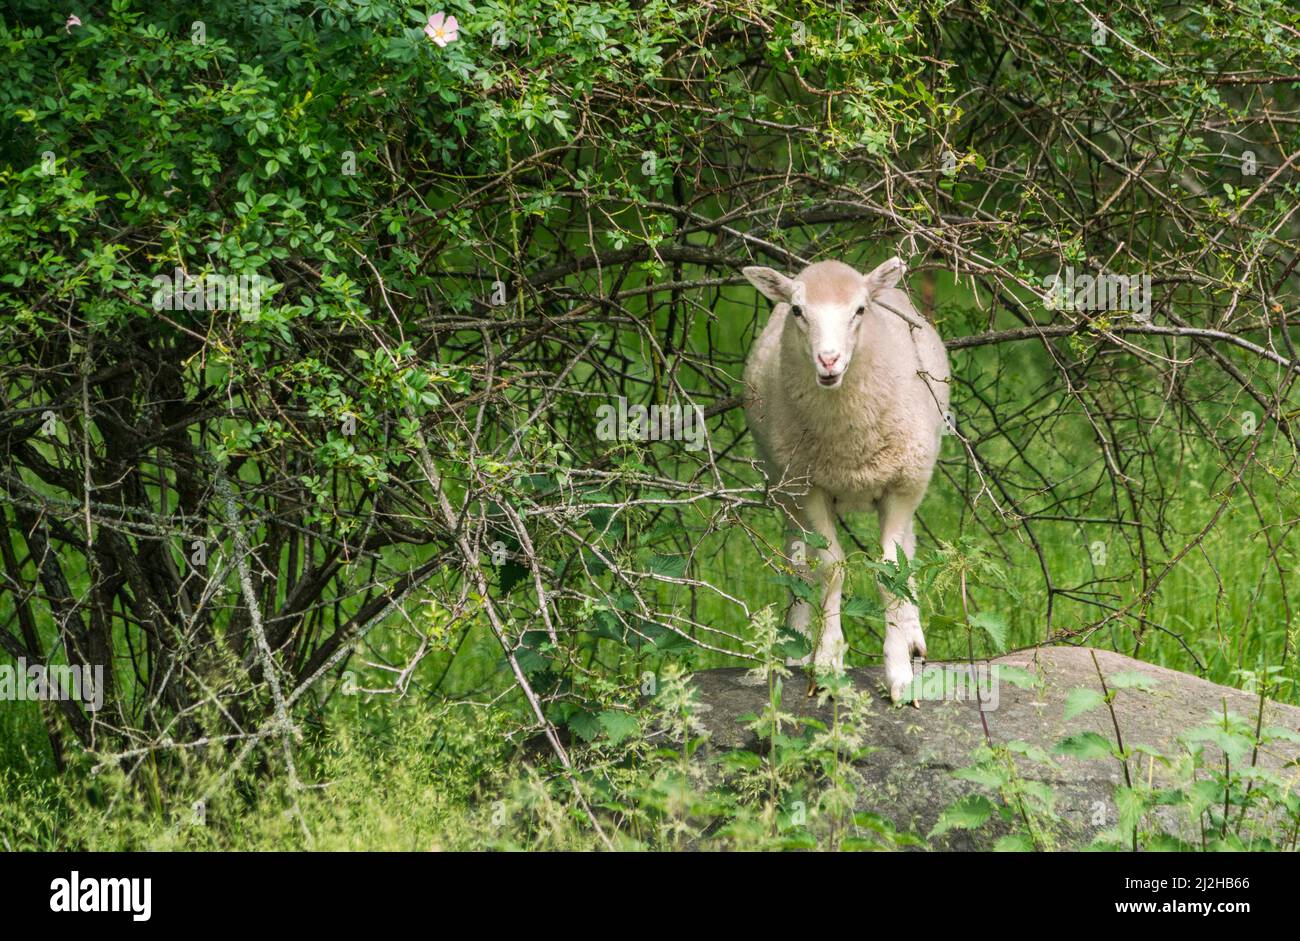 White sheep standing on boulder in field Stock Photo